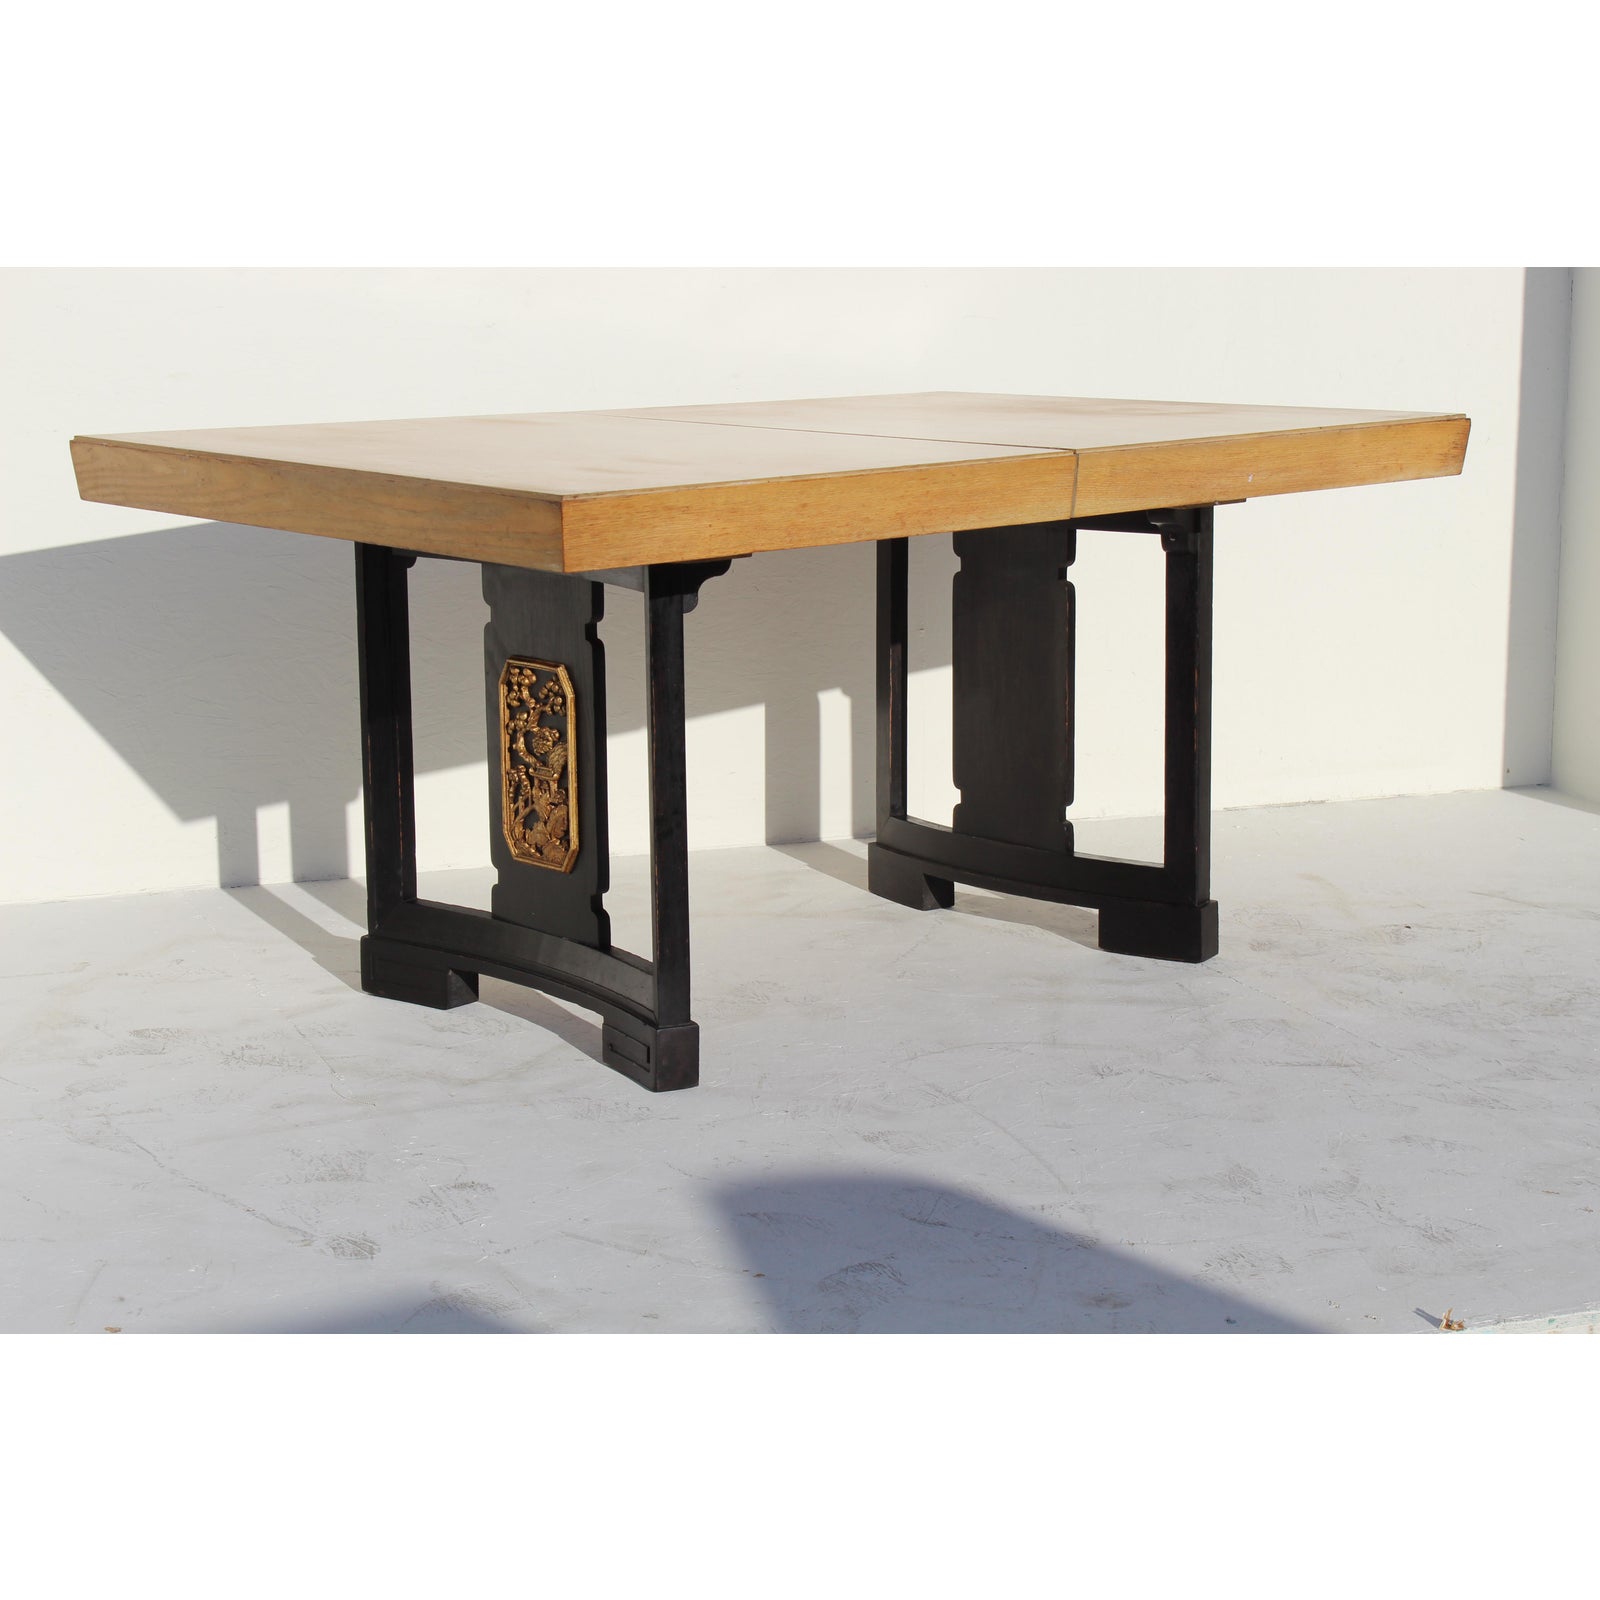 1940s-vintage-james-mont-dining-table-7577